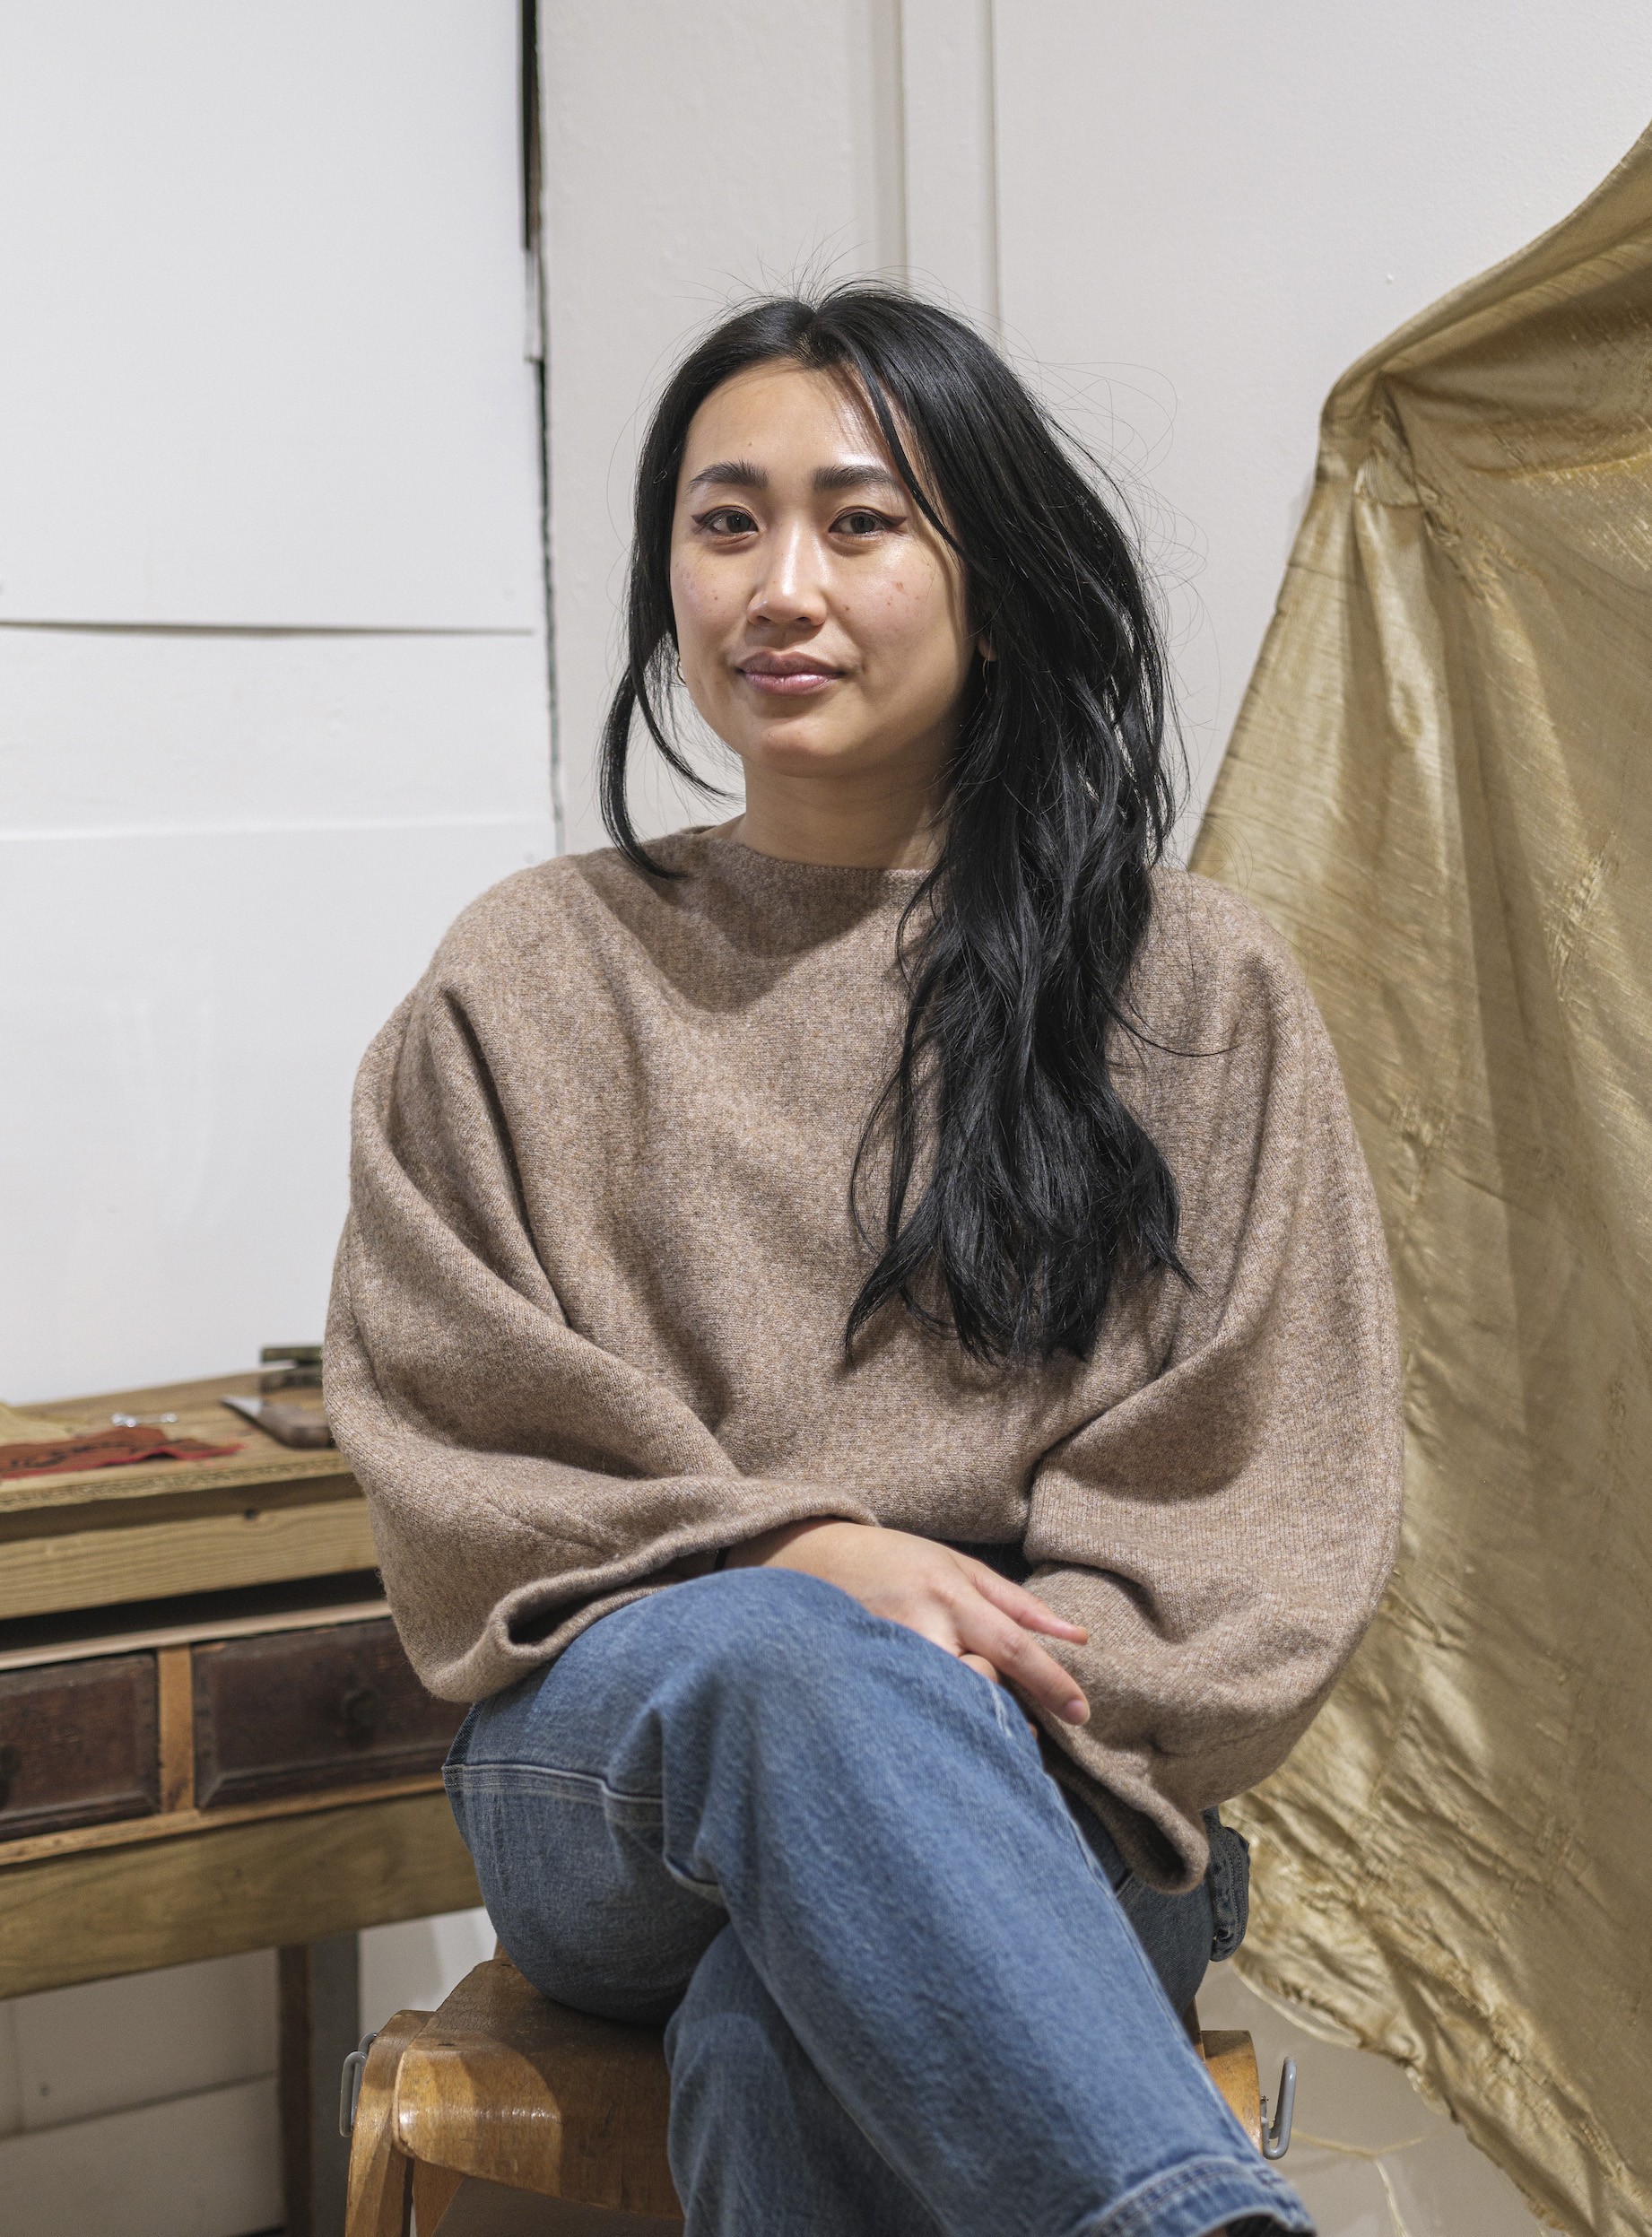 Rachel TonThat is seated, wearing a brow sweater, looking at the camera and smiling softly